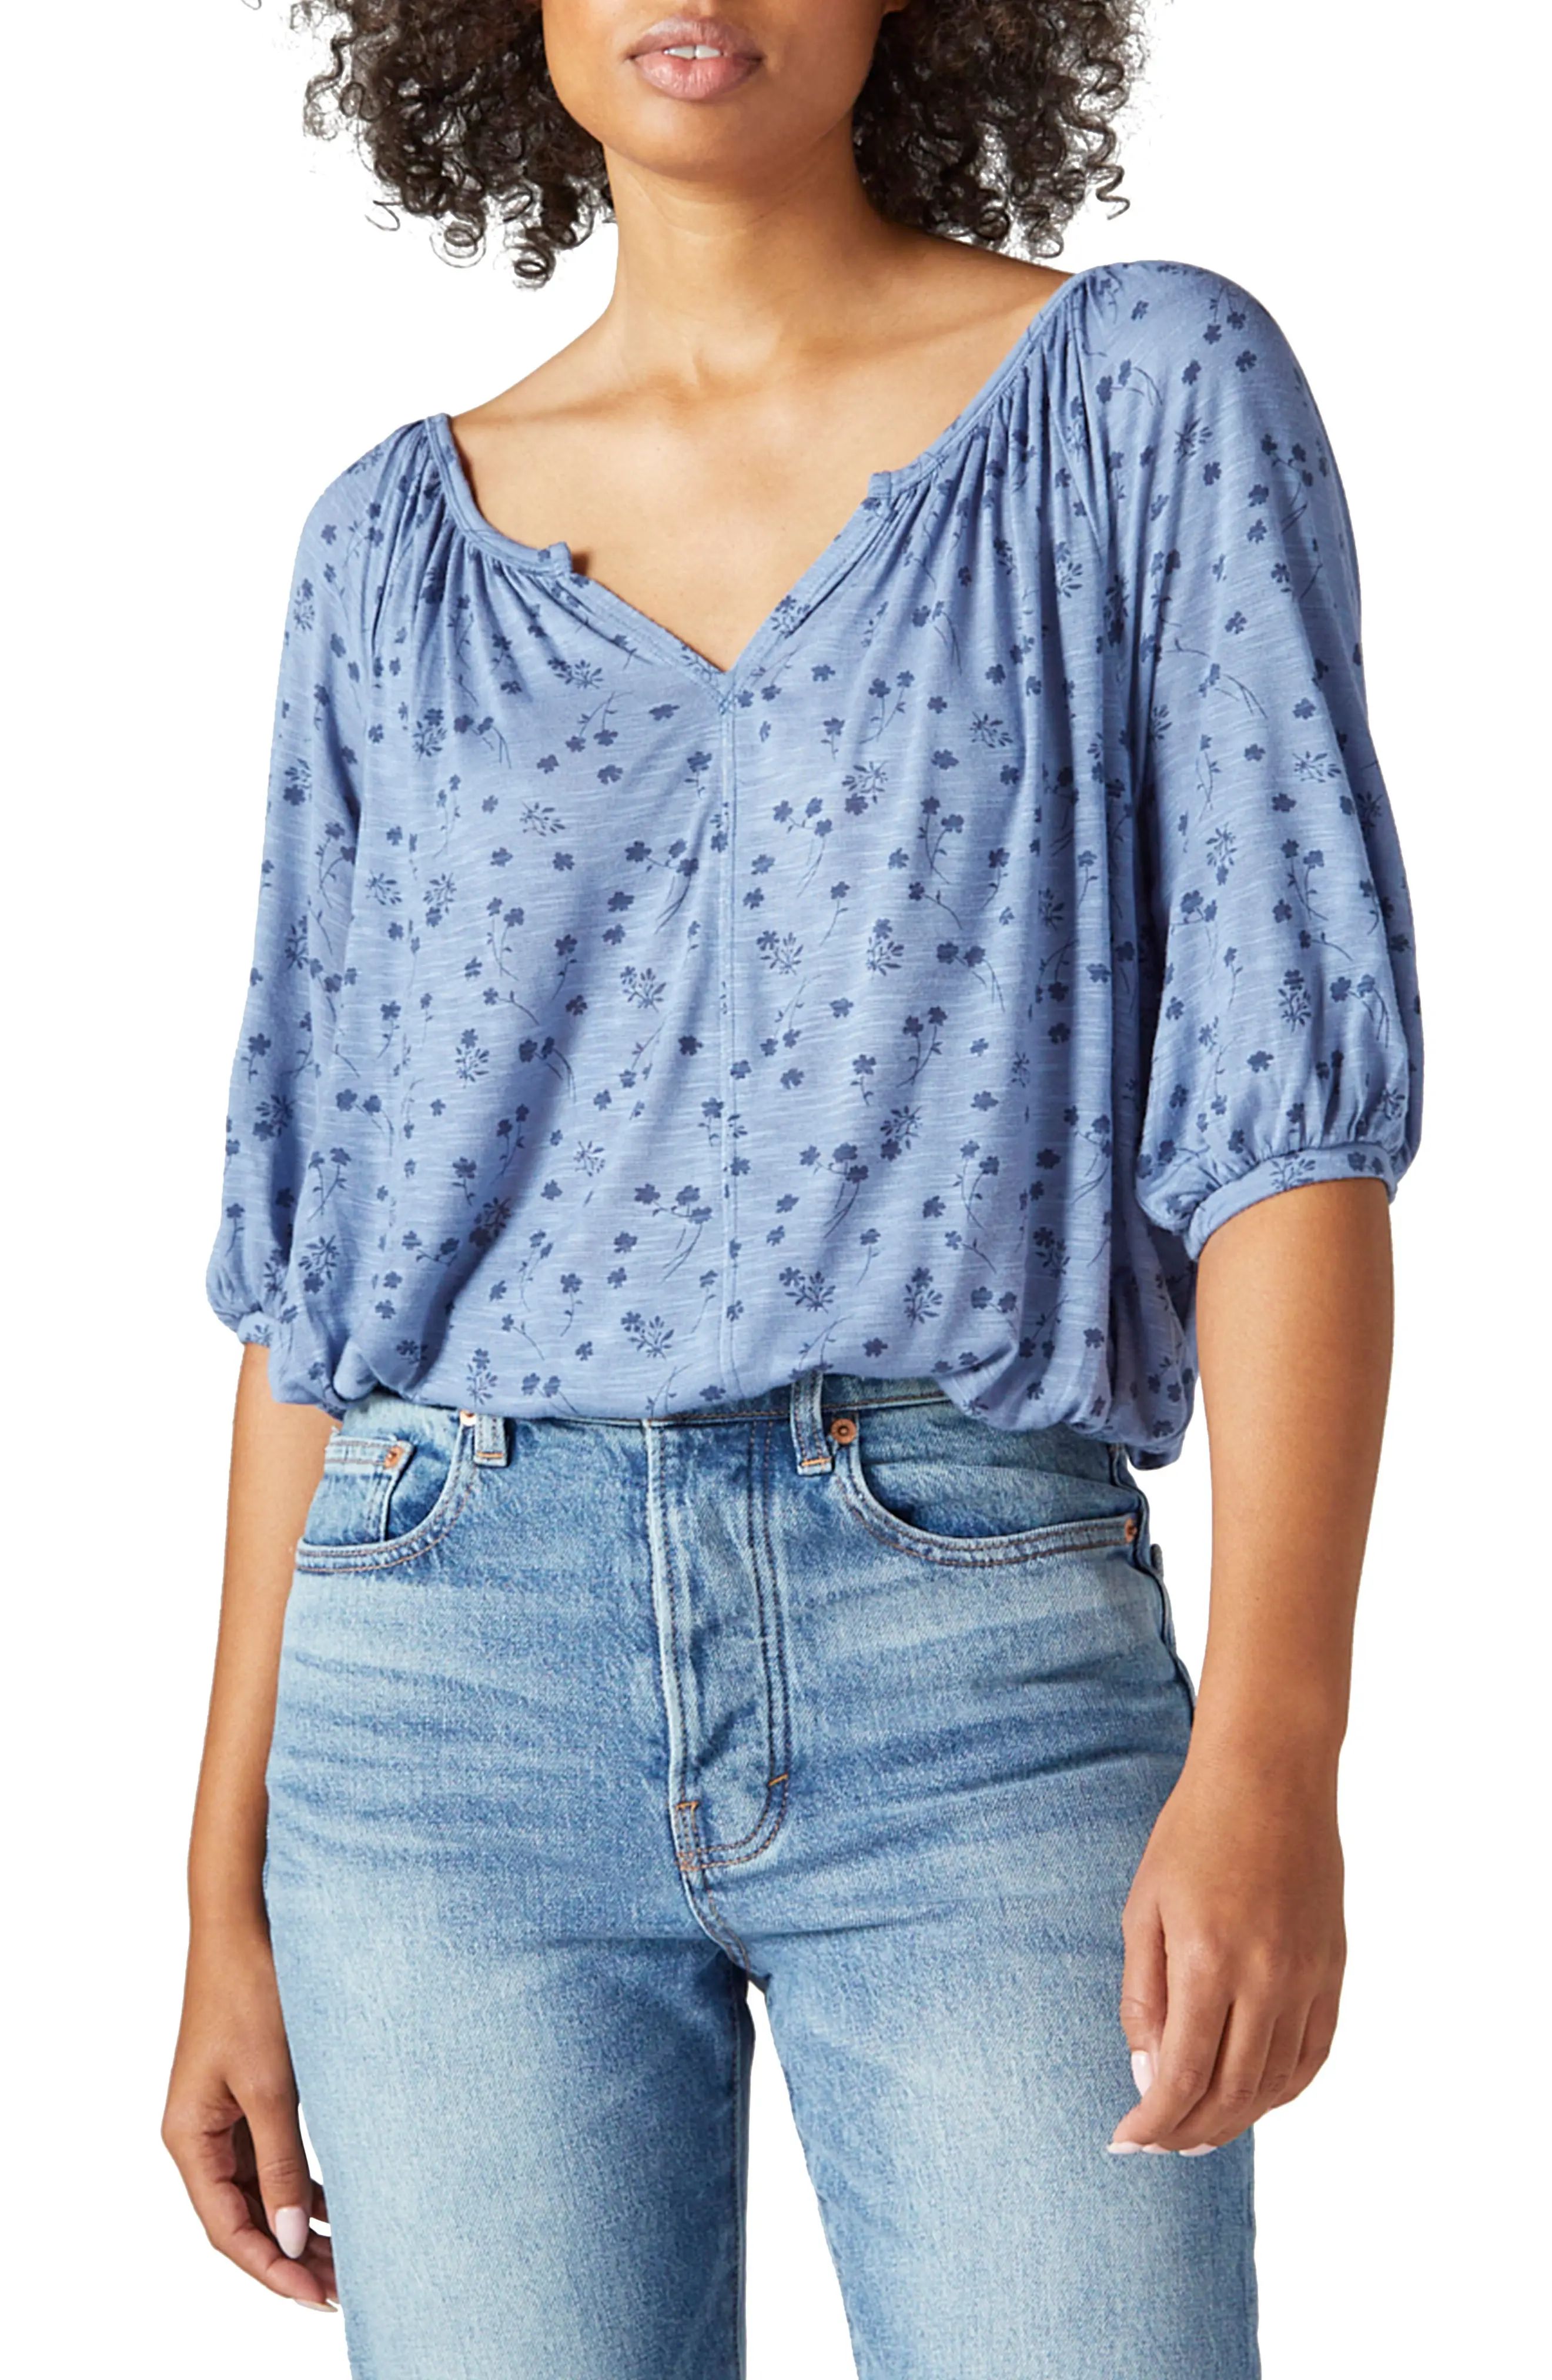 Lucky Brand Knit Peasant Top in Blue Floral at Nordstrom, Size Medium | Nordstrom